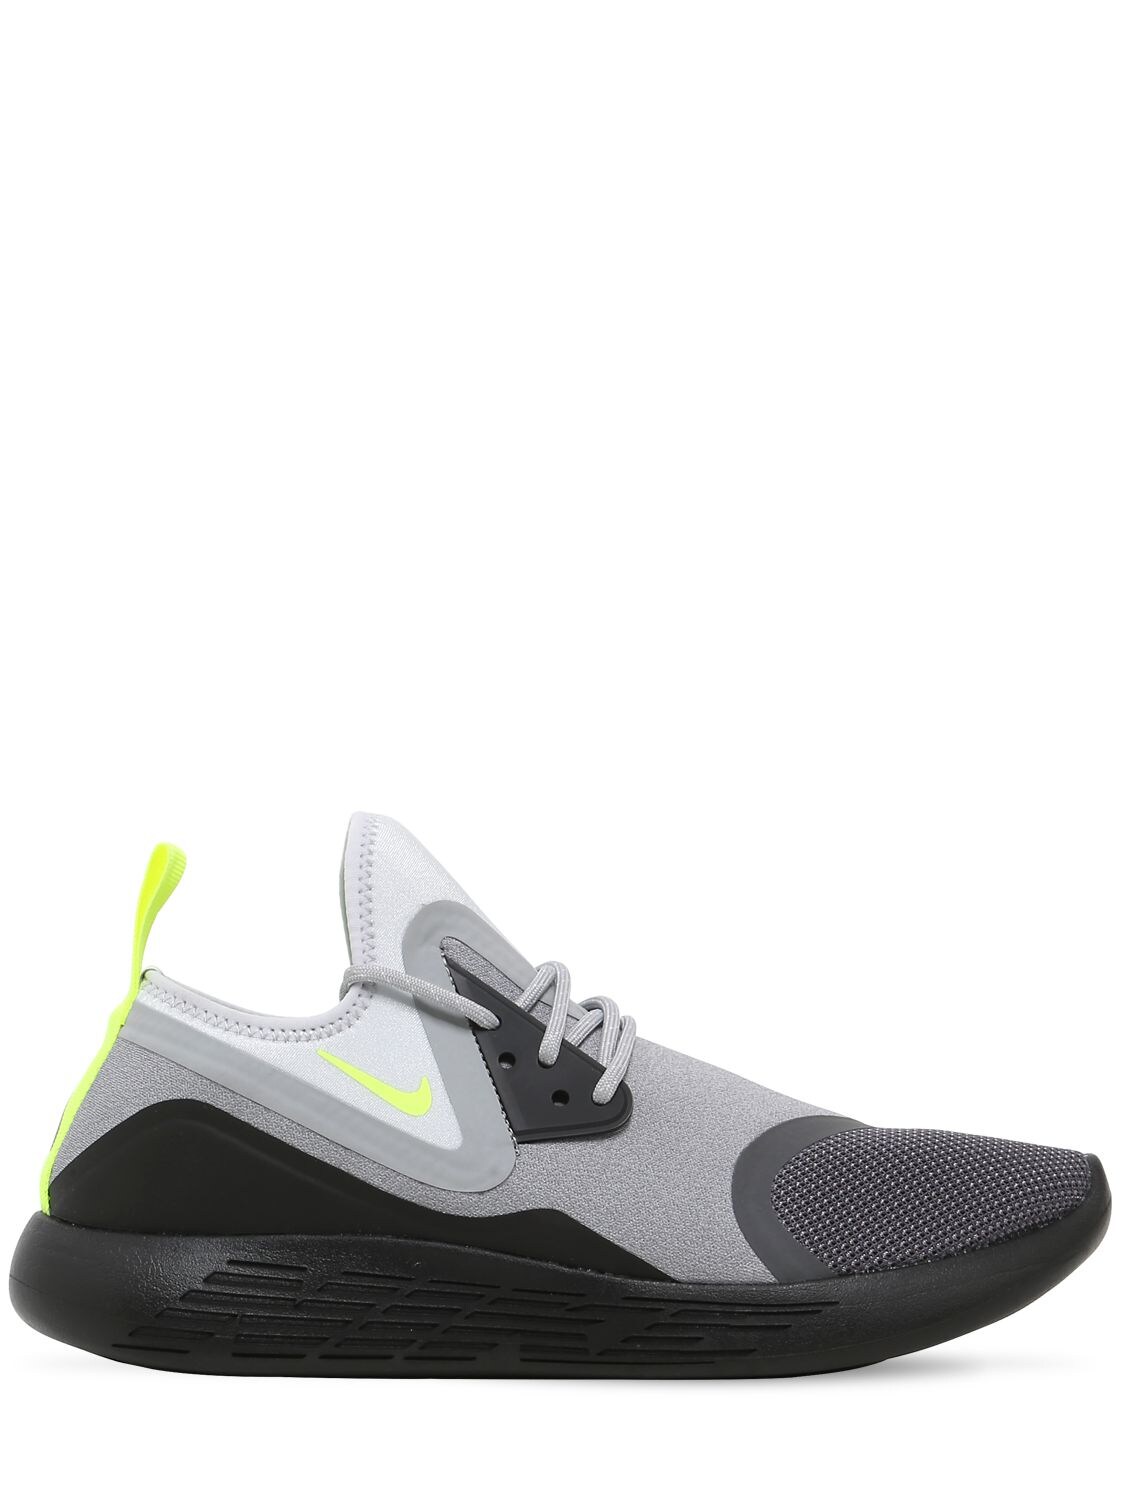 Lunar Charge Bn Sneakers for Mens at Goxip